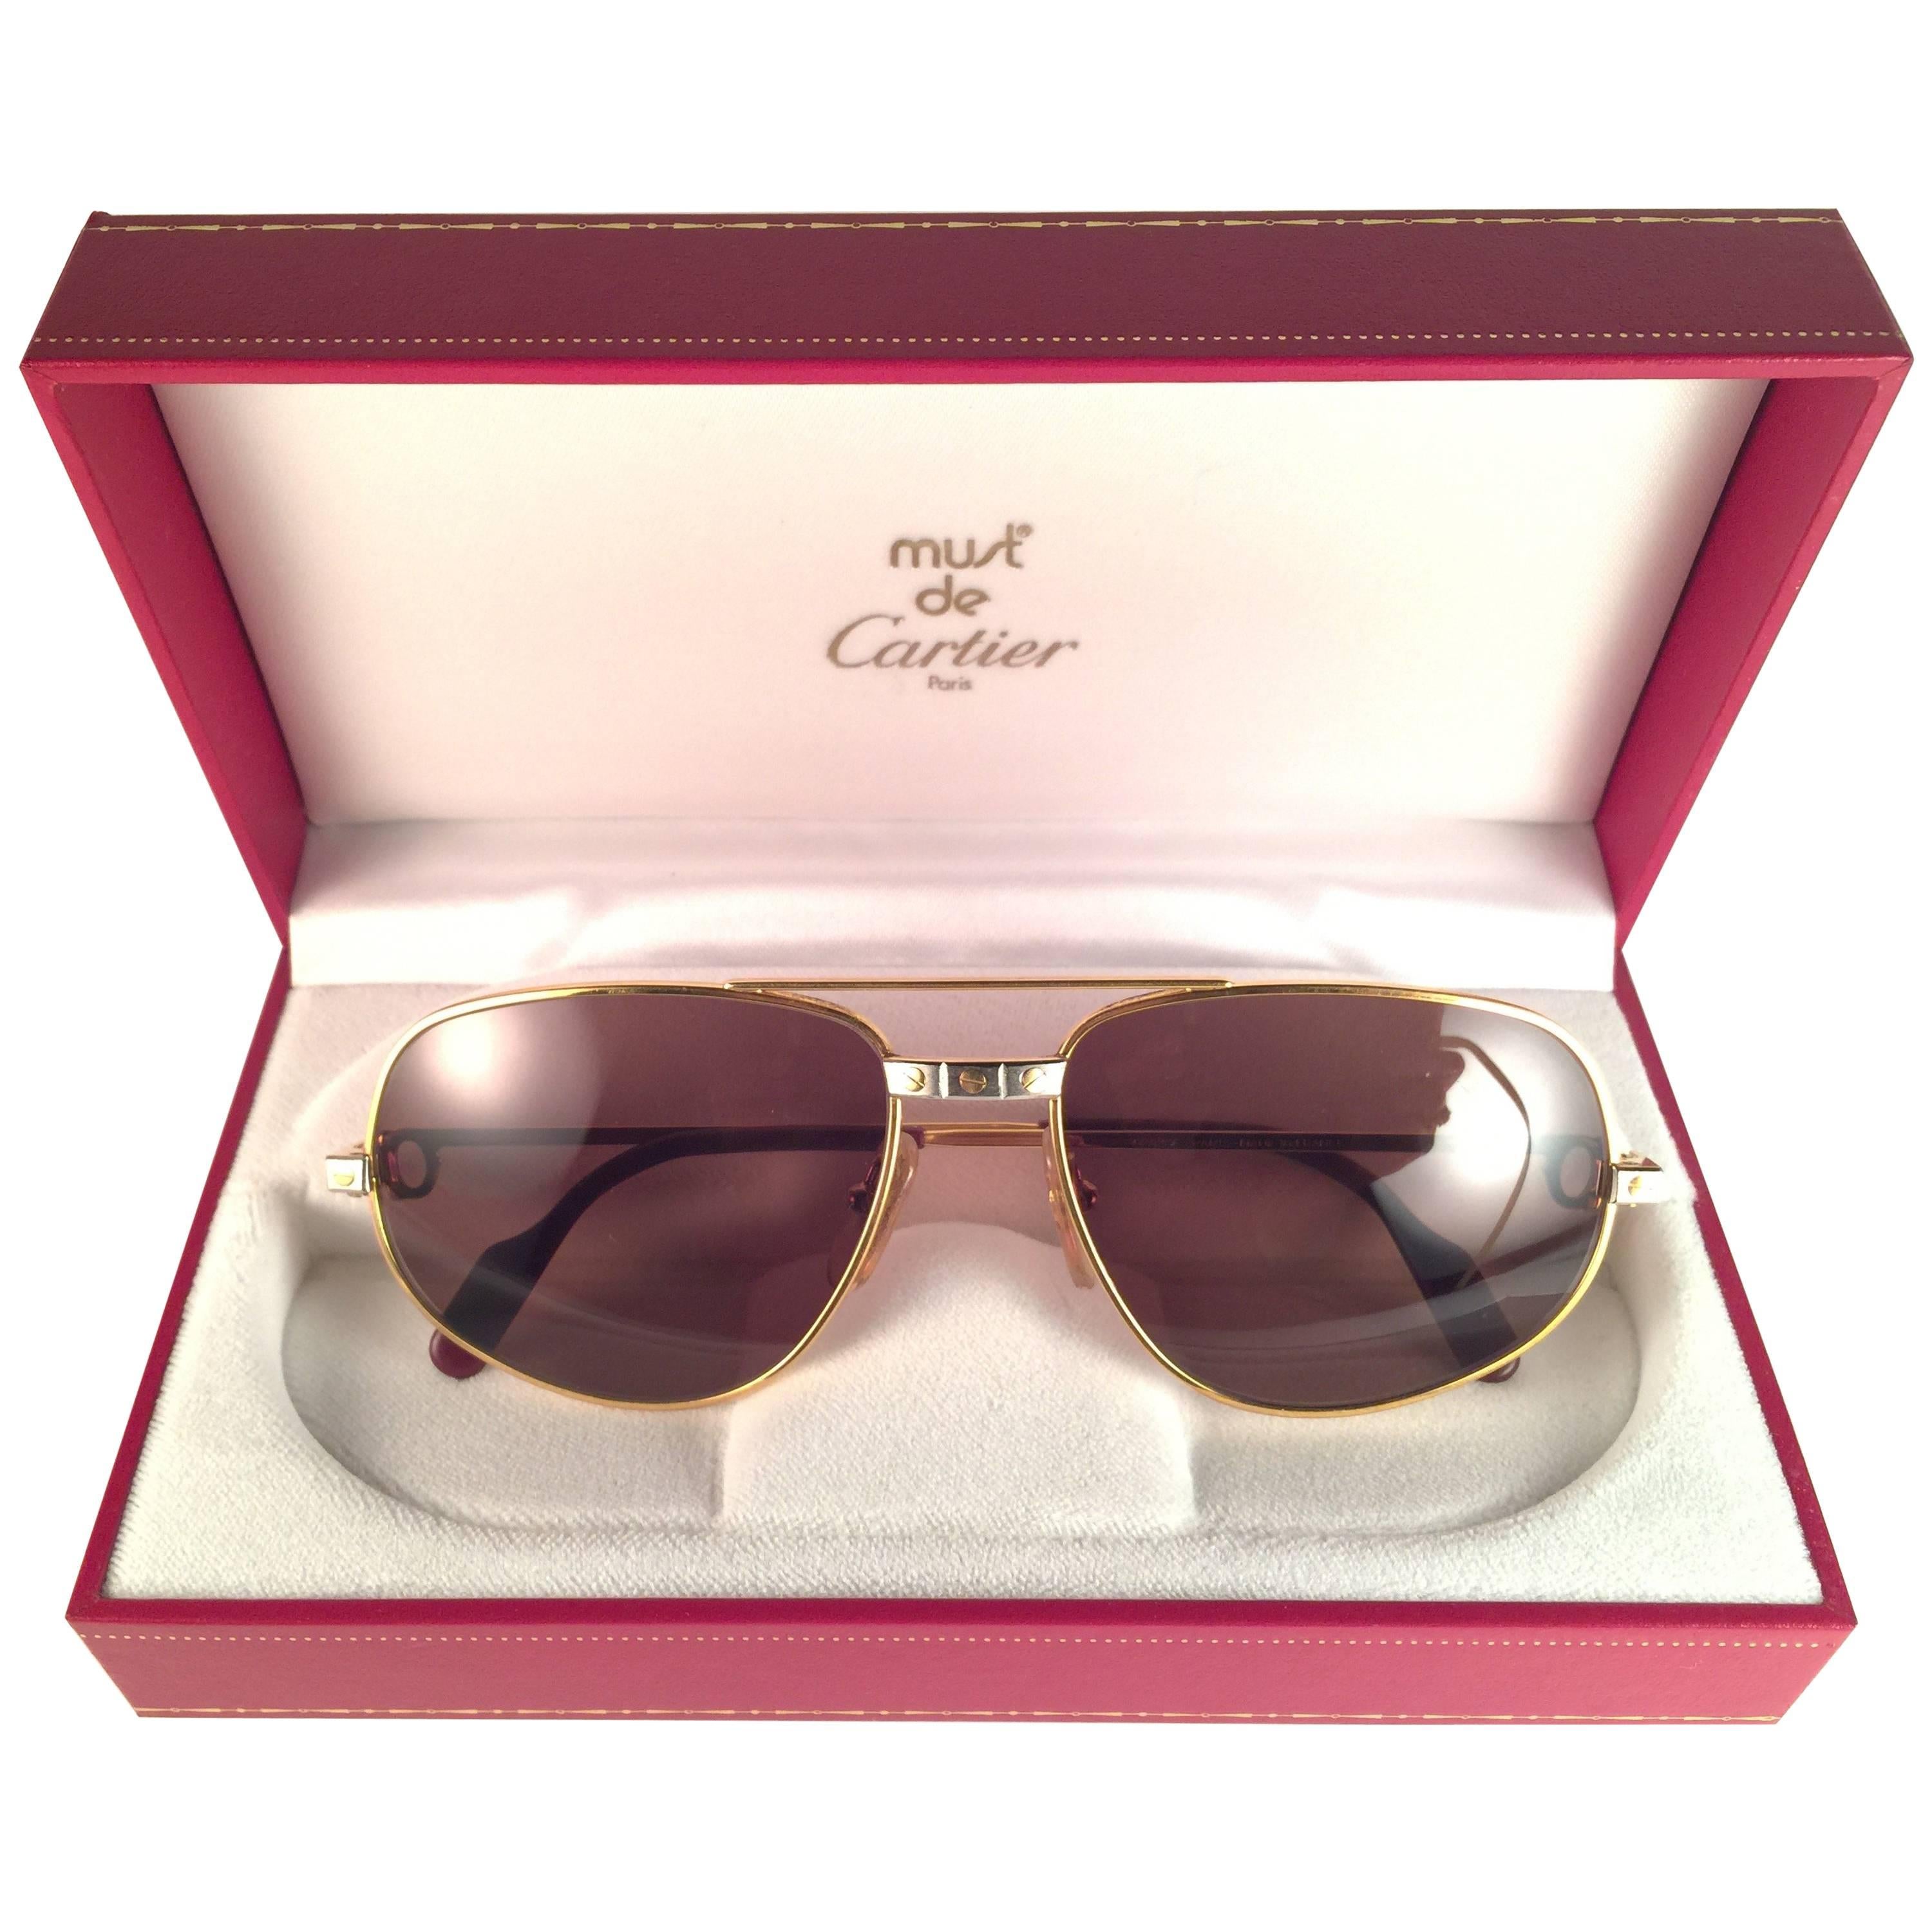 Vintage Cartier Romance Santos sunglasses with the honey brown (uv protection)lenses.  Frame is with the front and sides in yellow and white gold. All hallmarks. Red enamel with Cartier gold signs on the ear paddles. Both arms sport the C from